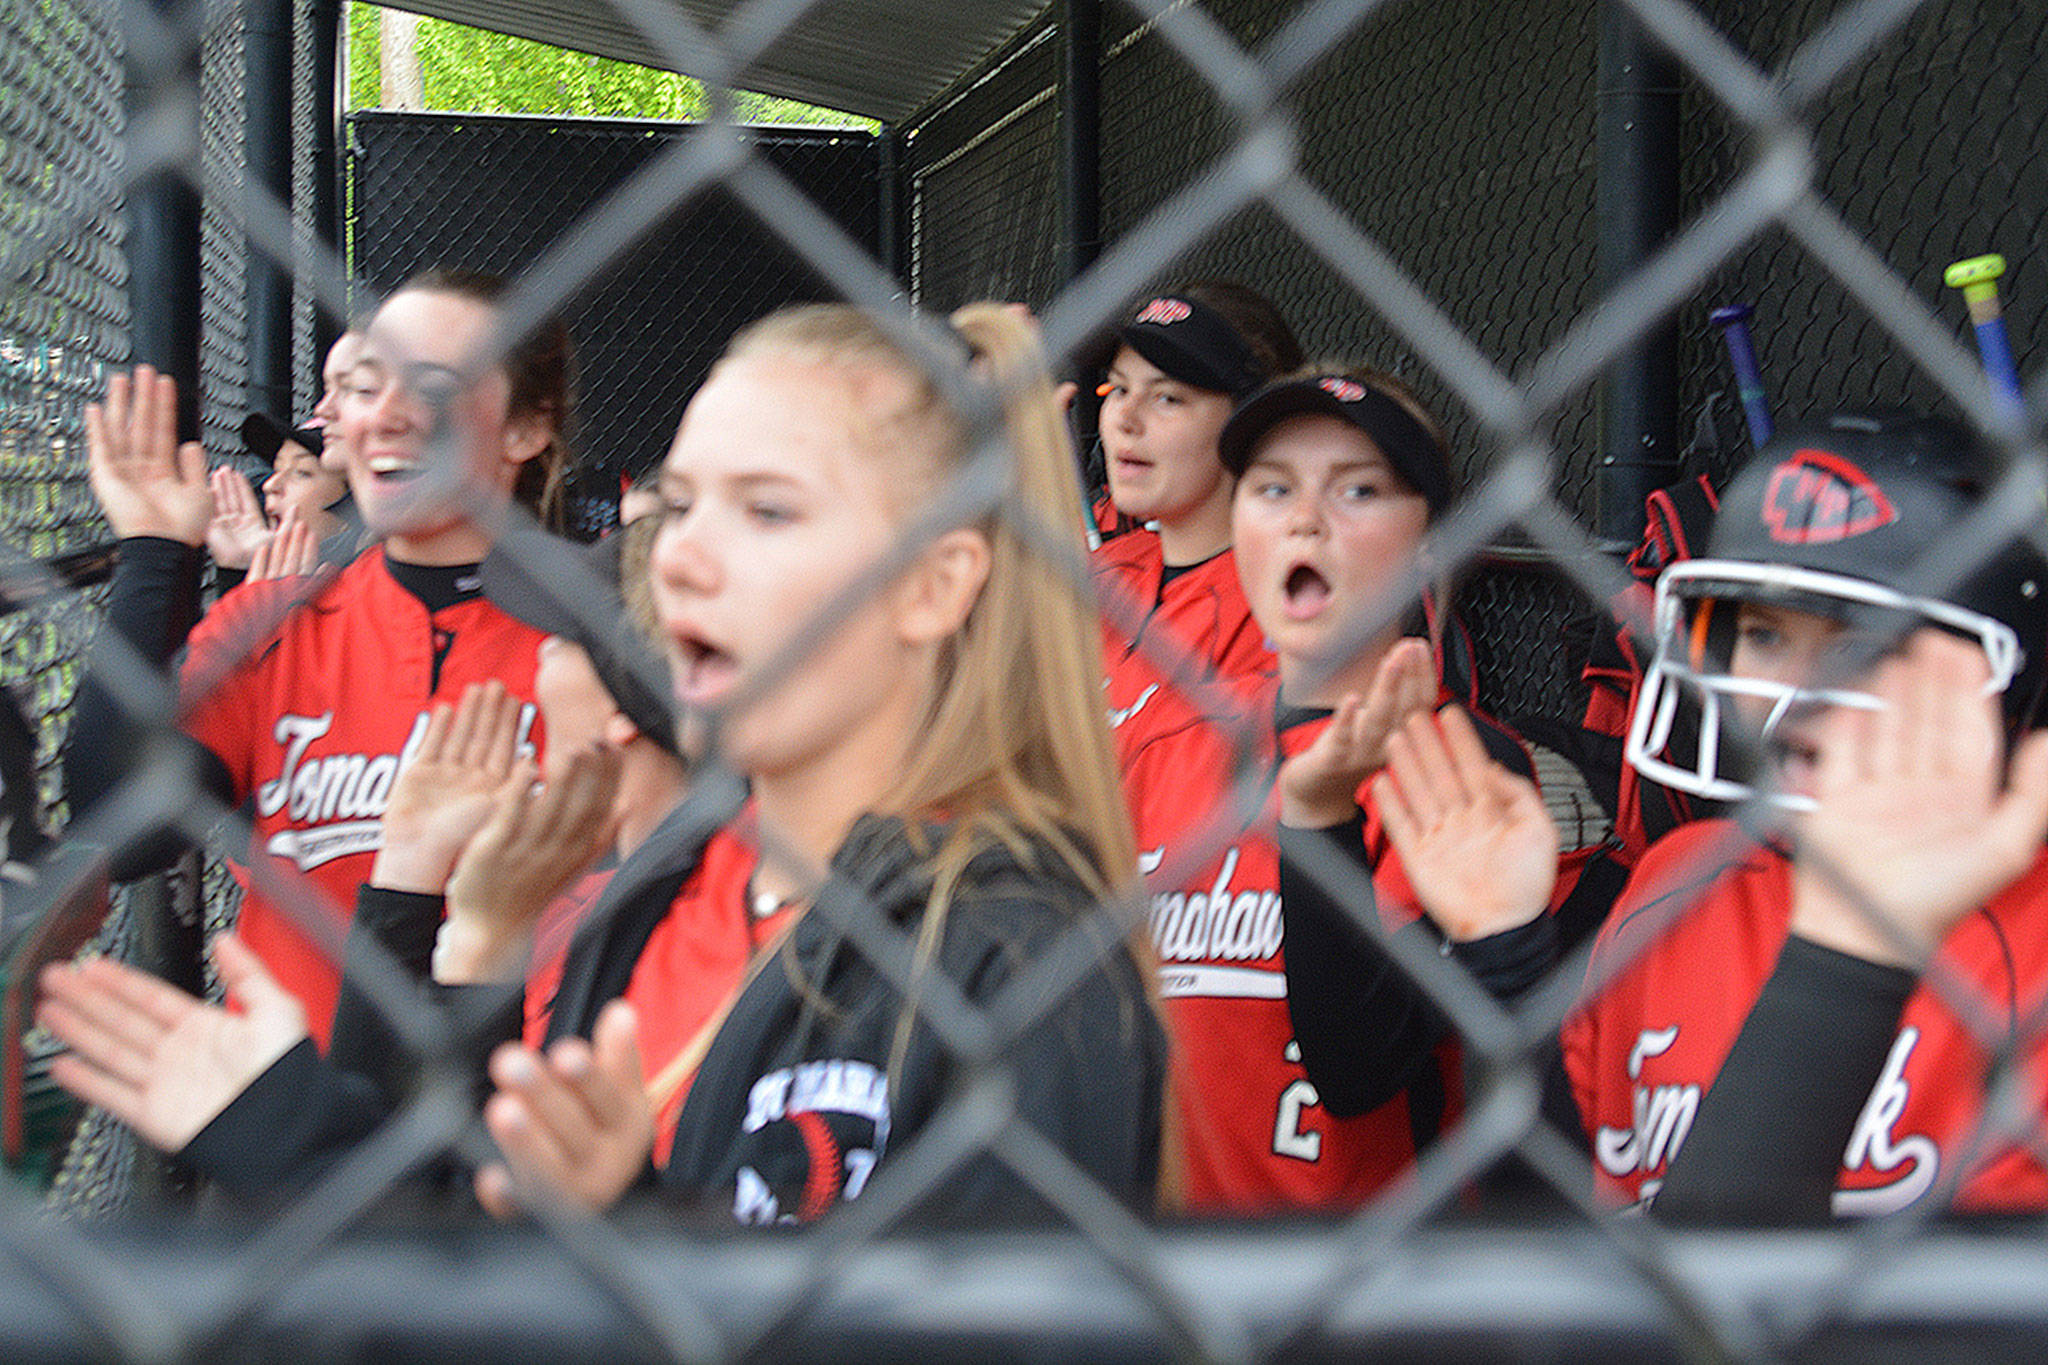 M-P girls win first game at state Friday 6-2 (slide show)